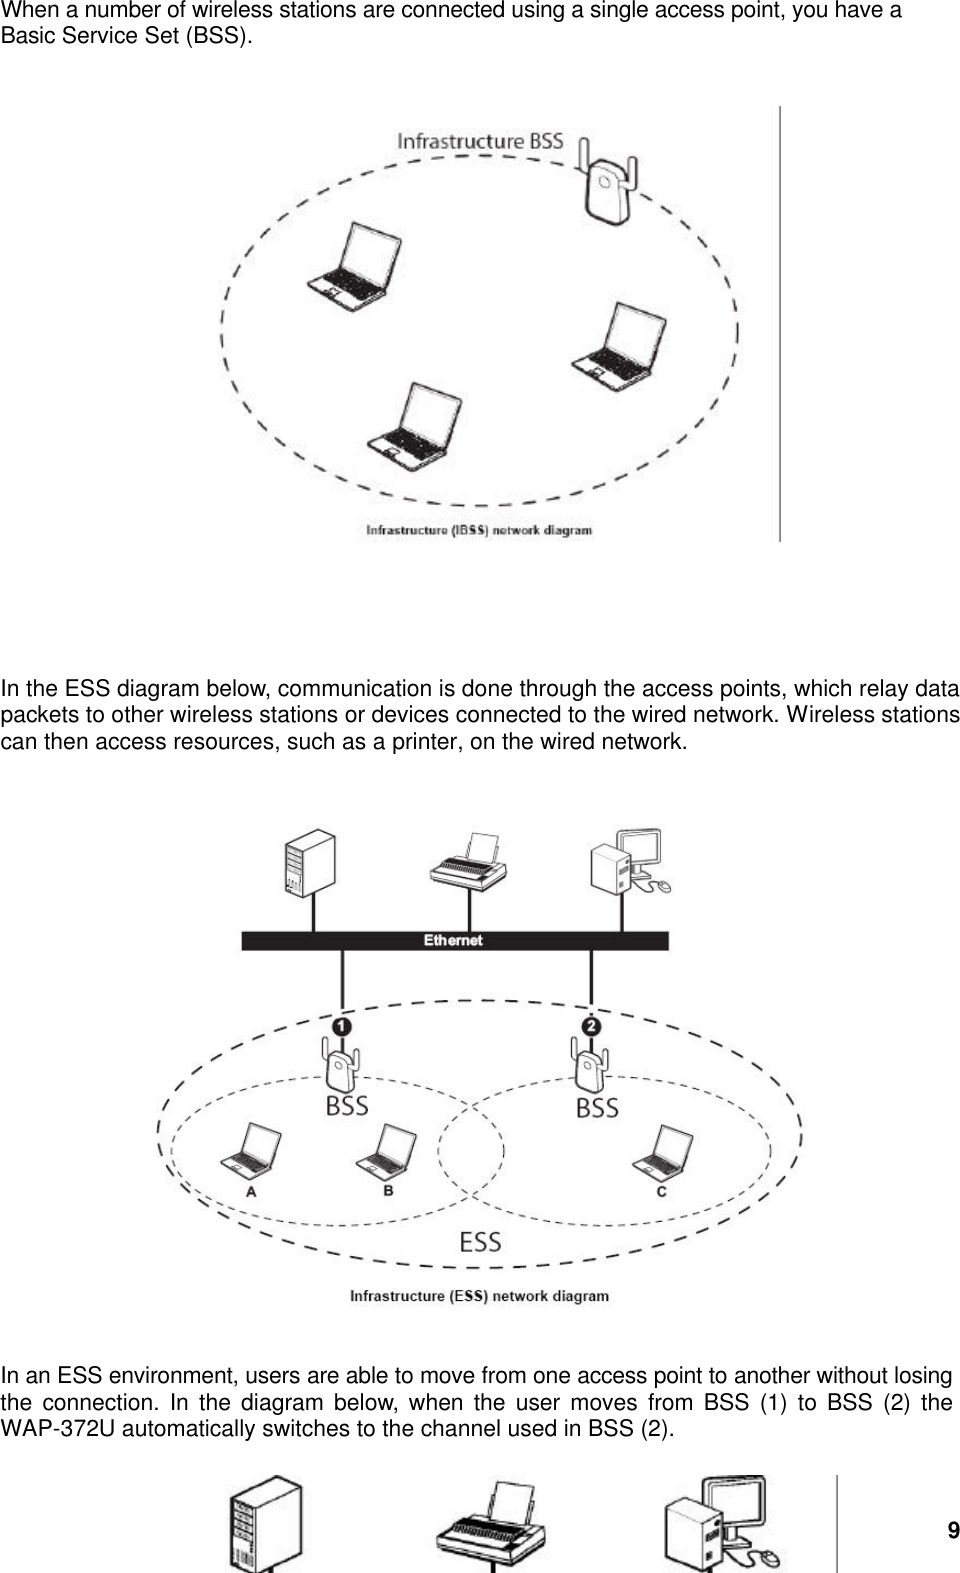 9 When a number of wireless stations are connected using a single access point, you have a Basic Service Set (BSS).         In the ESS diagram below, communication is done through the access points, which relay data packets to other wireless stations or devices connected to the wired network. Wireless stations can then access resources, such as a printer, on the wired network.     In an ESS environment, users are able to move from one access point to another without losing the connection. In the diagram below, when the user moves from BSS (1) to BSS (2) the WAP-372U automatically switches to the channel used in BSS (2).  